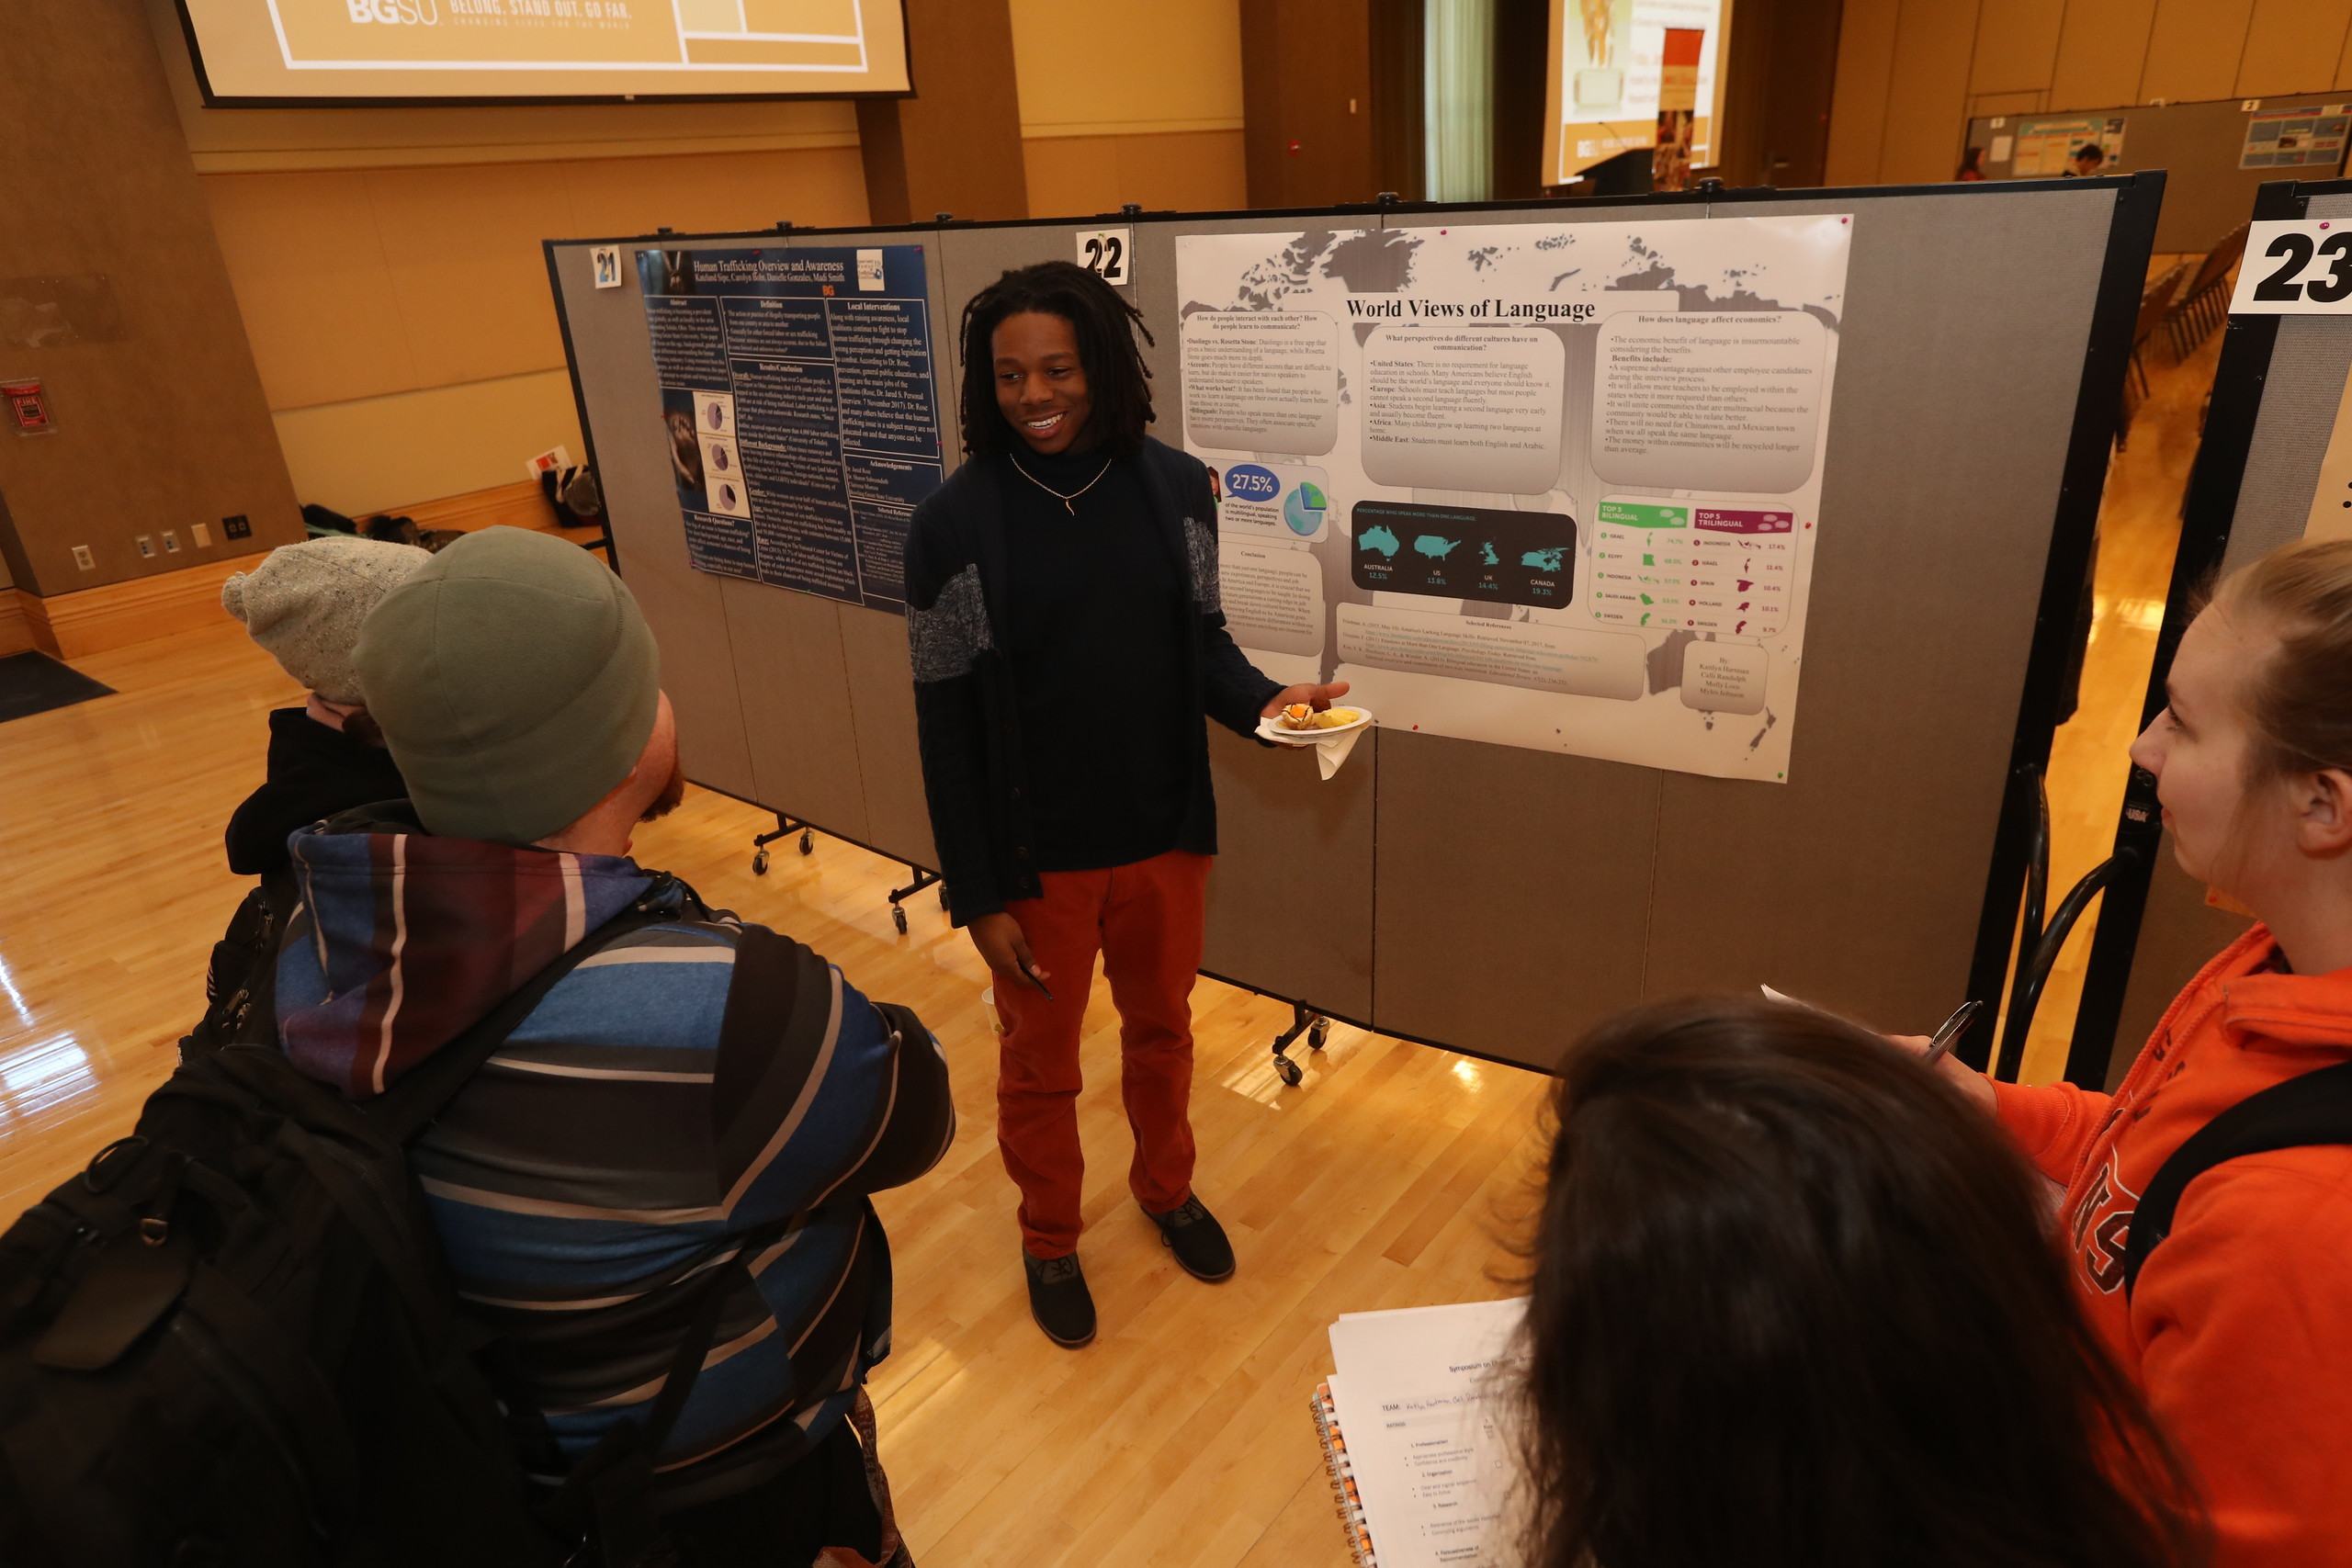 BGSU students present posters of their original research on diversity at a CURS event, including ethnic studies majors.